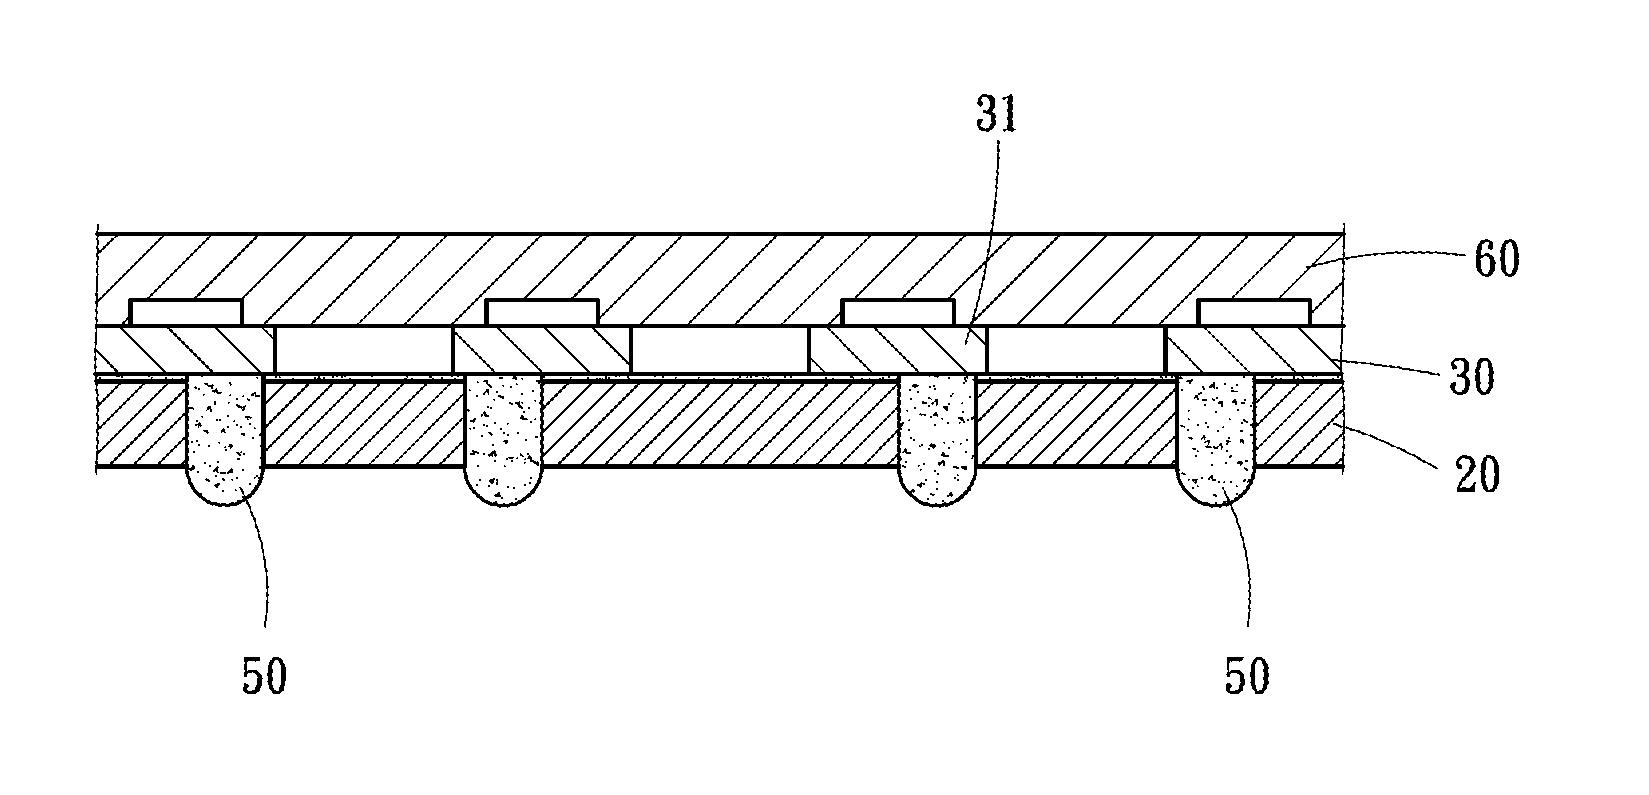 Quad-flat no-leads package structure and method of manufacturing the same